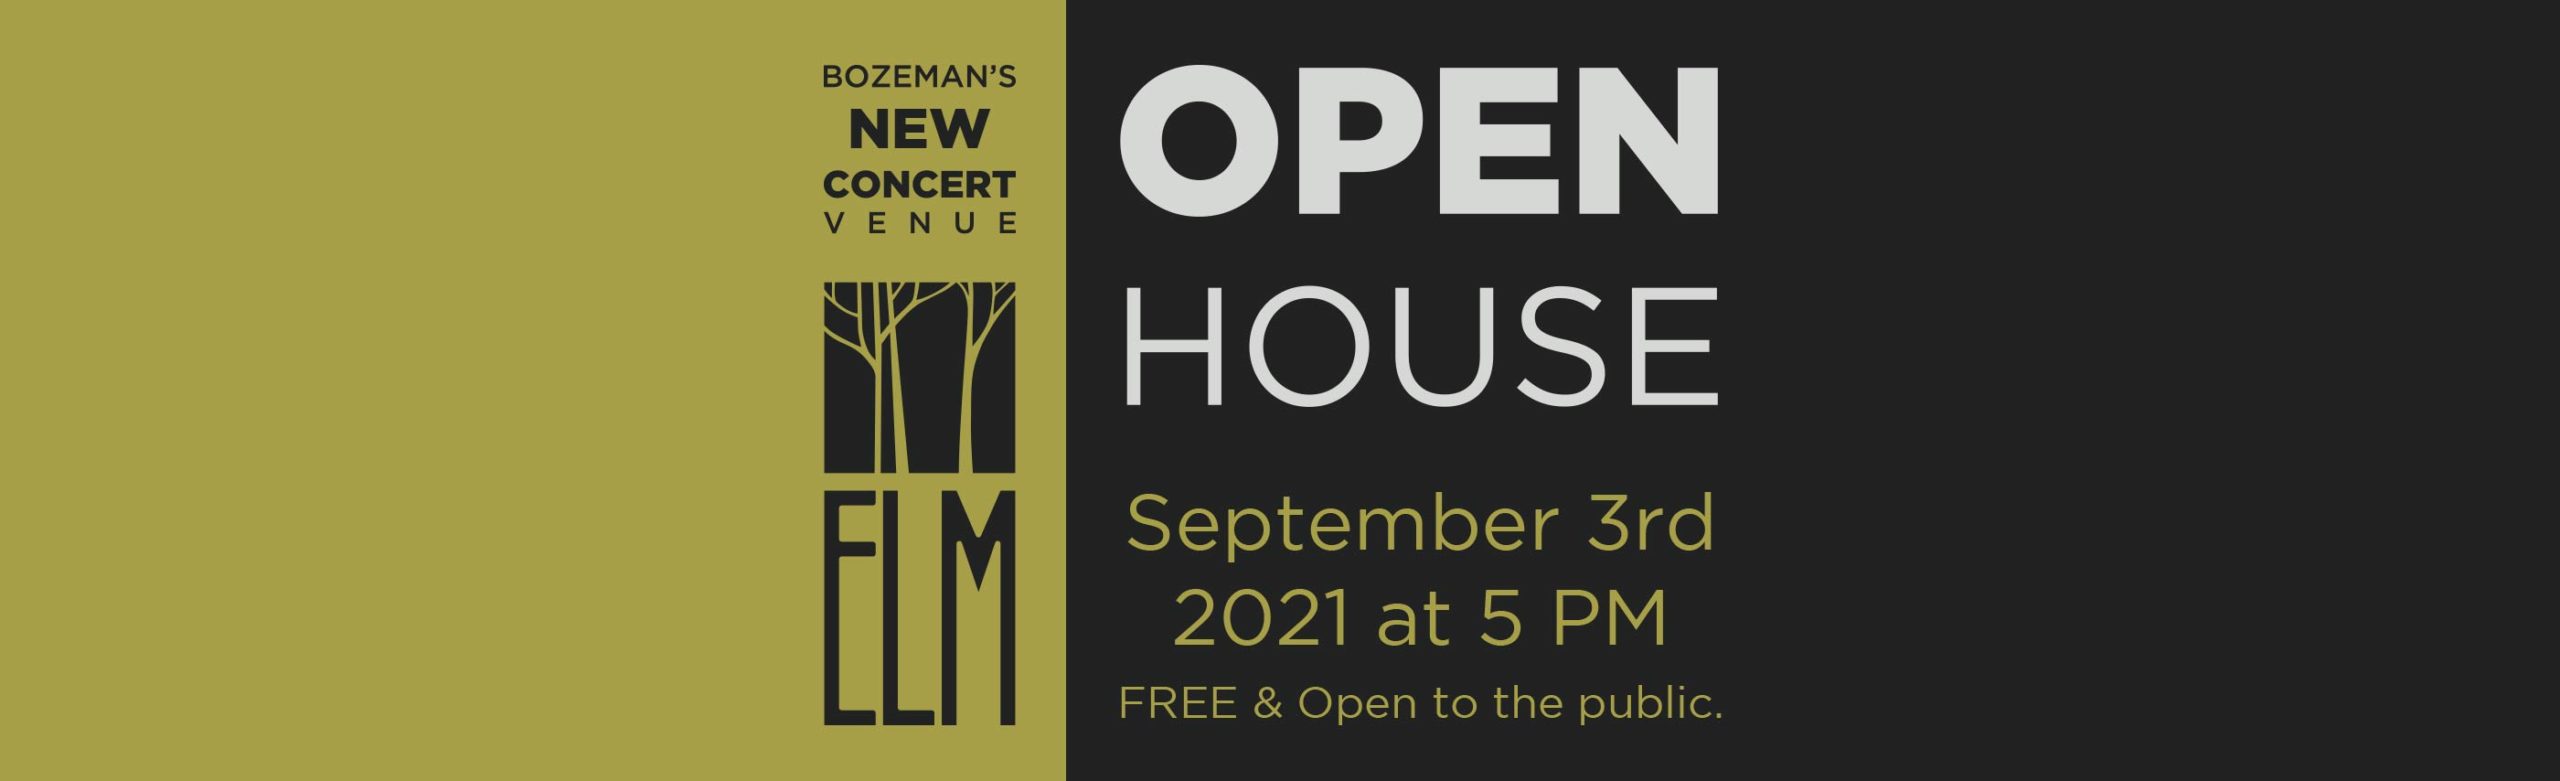 The ELM’s Open House